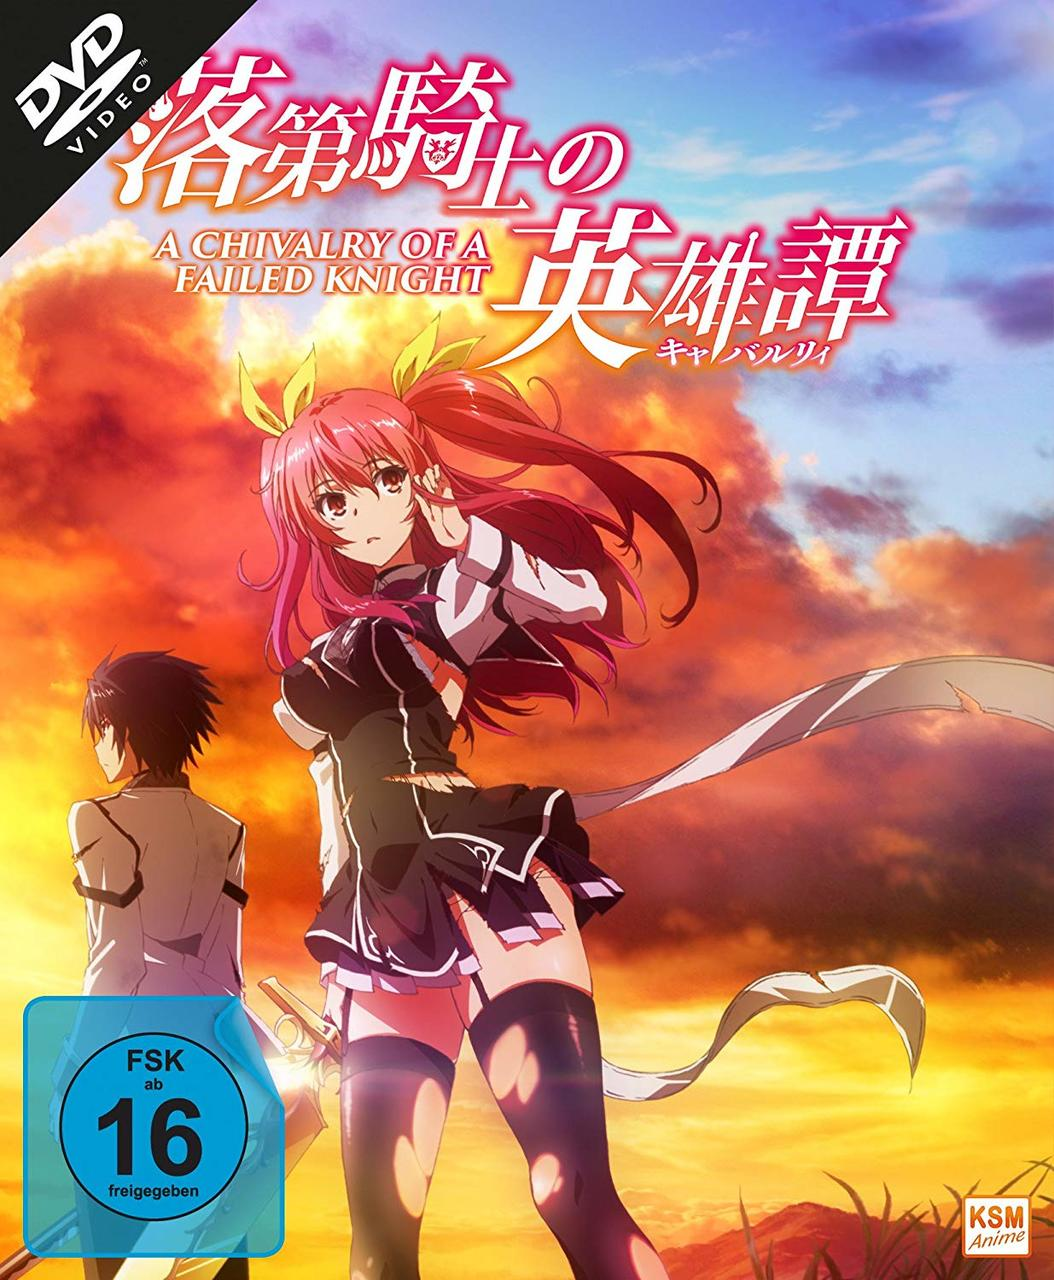 Chivalry of Failed 1-12) A Knight - Gesamtedition a DVD (Episoden